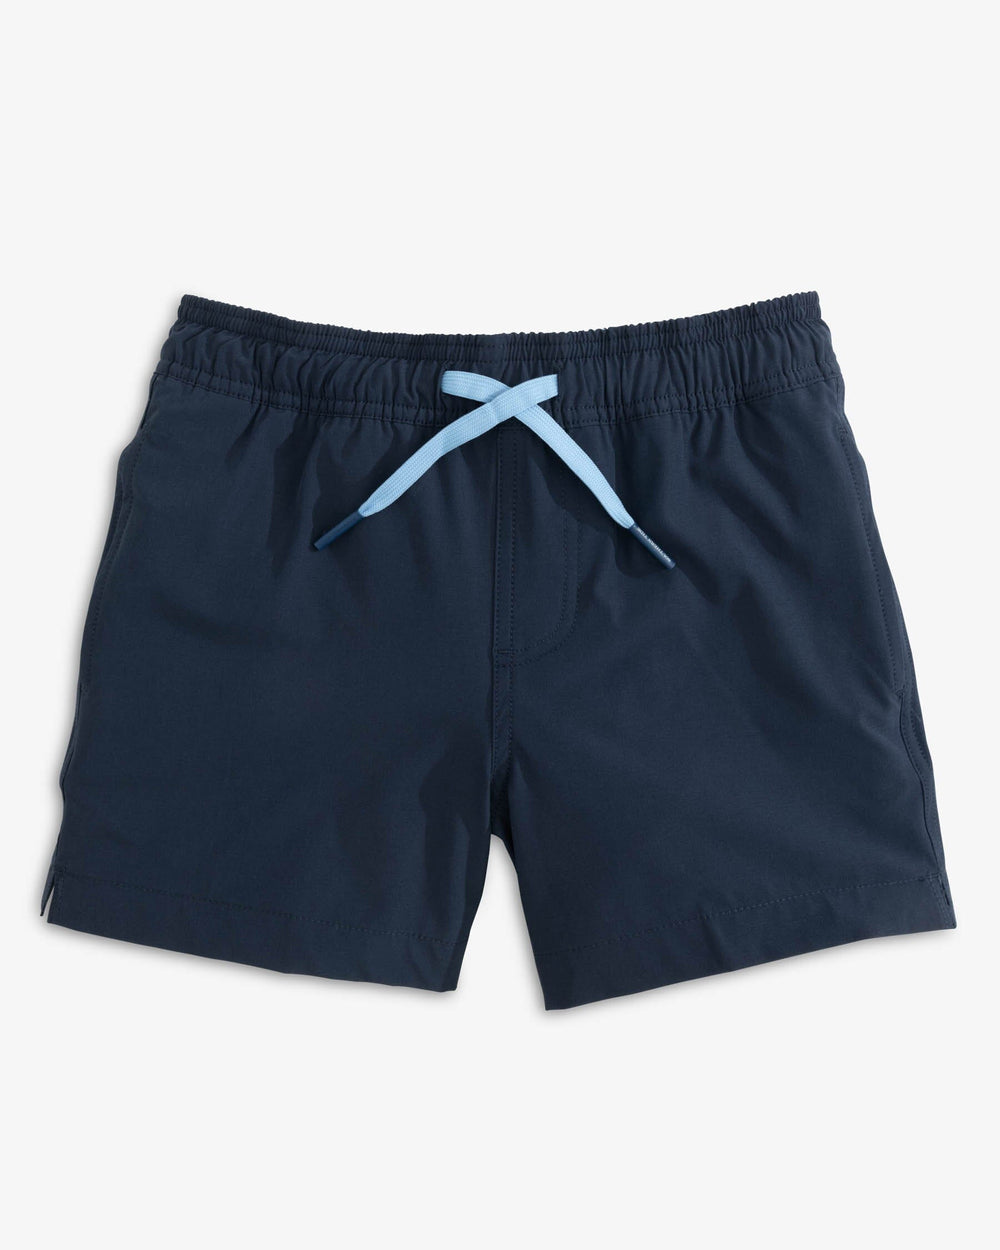 The front view of the Southern Tide Boys Solid Swim Truck 2 0 by Southern Tide - True Navy